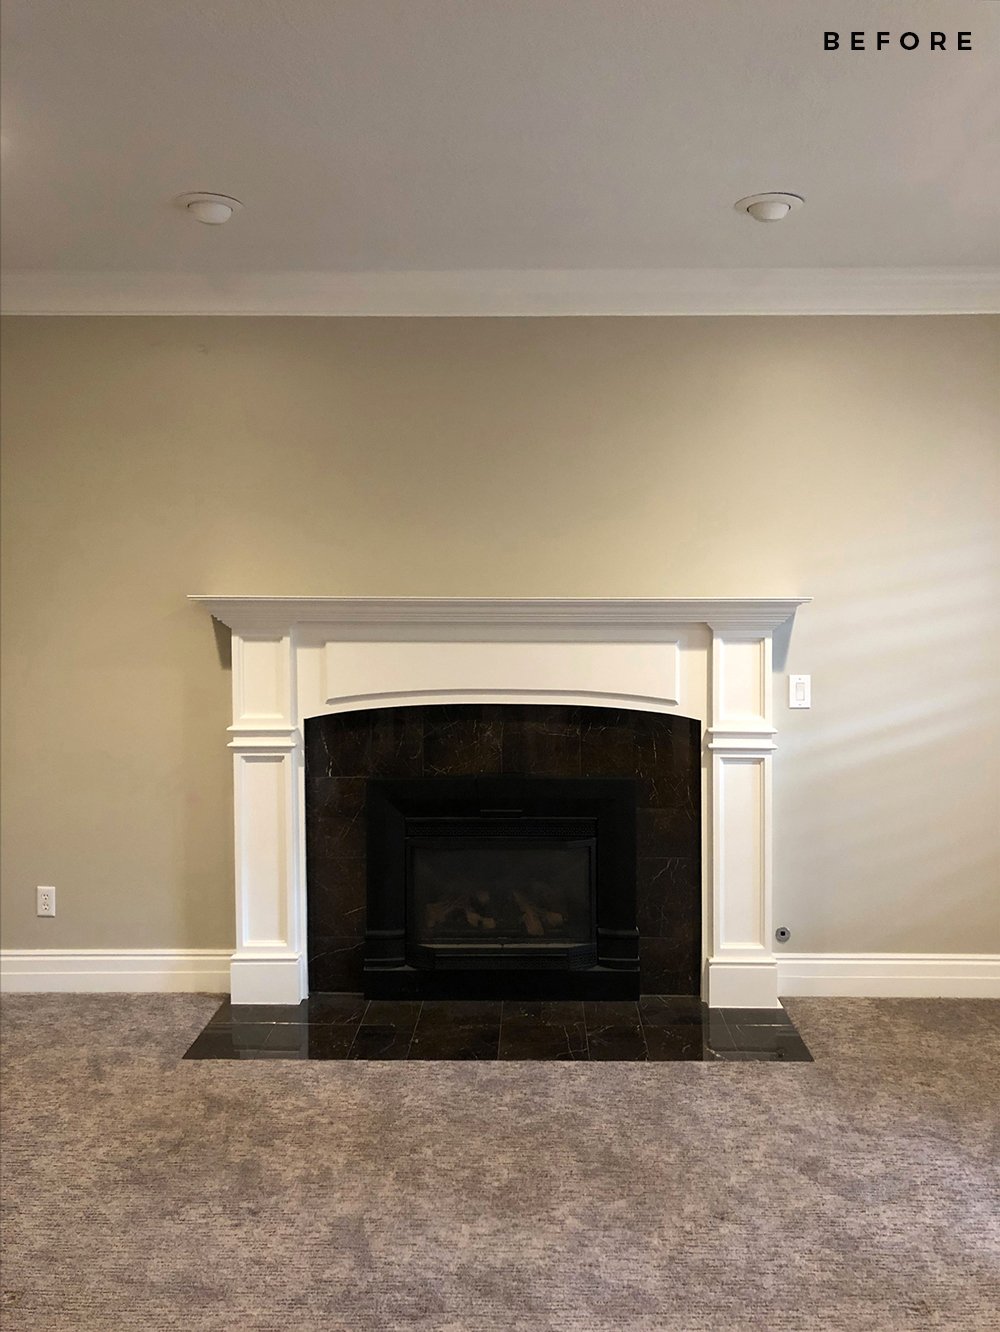 Fireplace Makeover + Cast Mantel Options - roomfortuesday.com